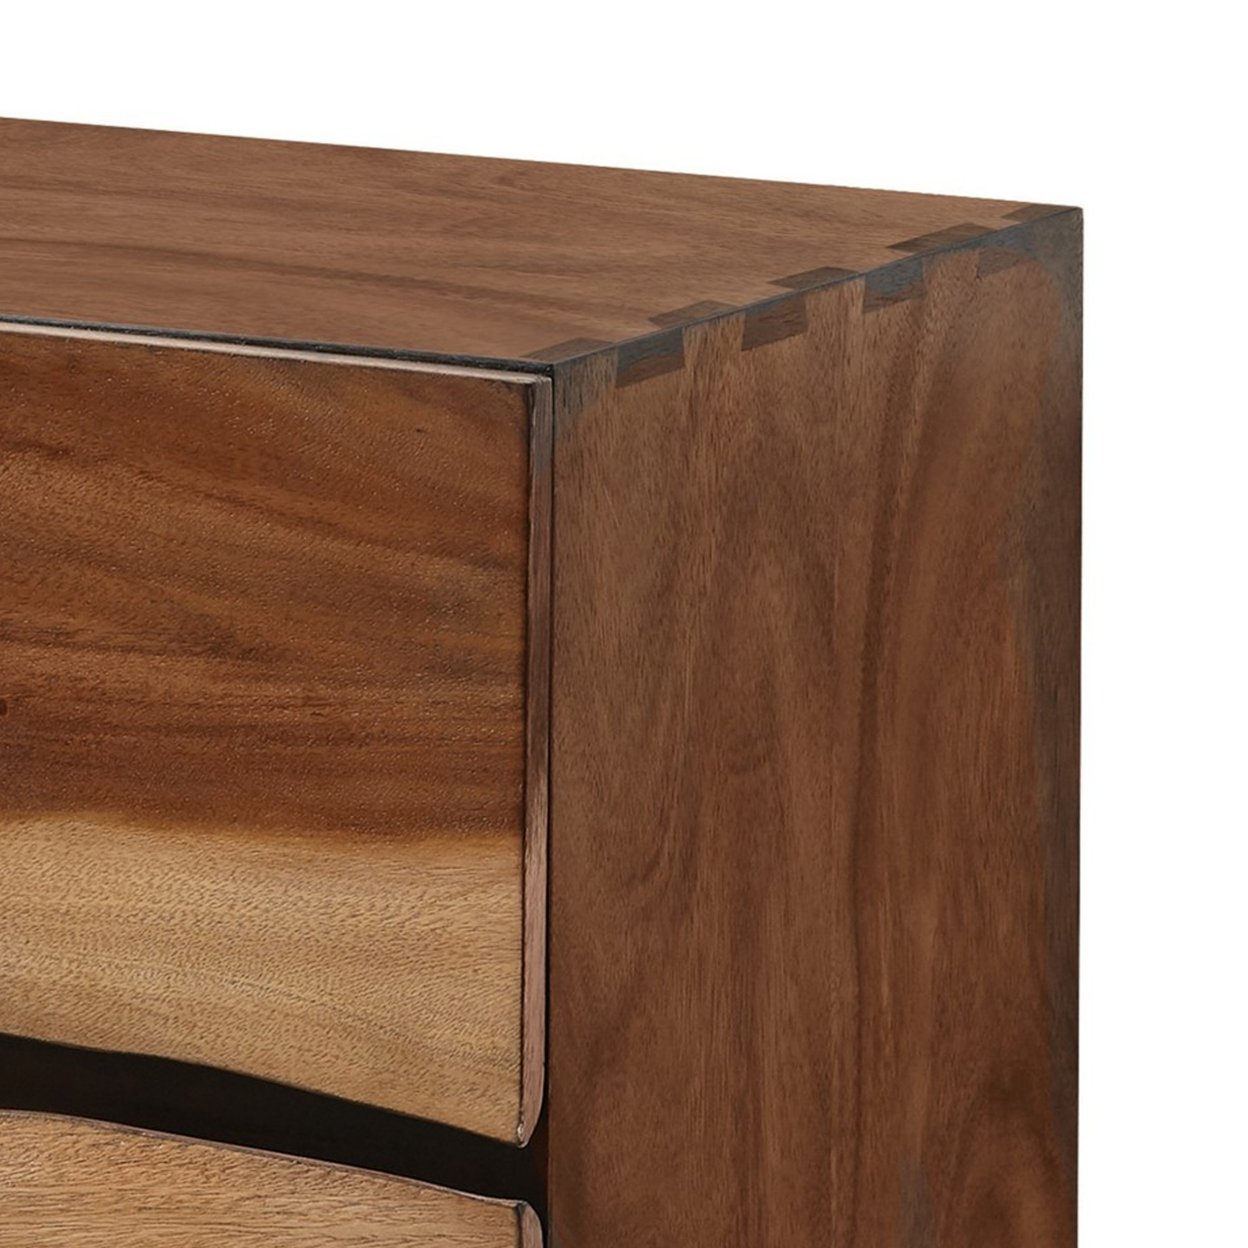 Nightstand With 2 Drawers And Live Edge Details, Brown- Saltoro Sherpi